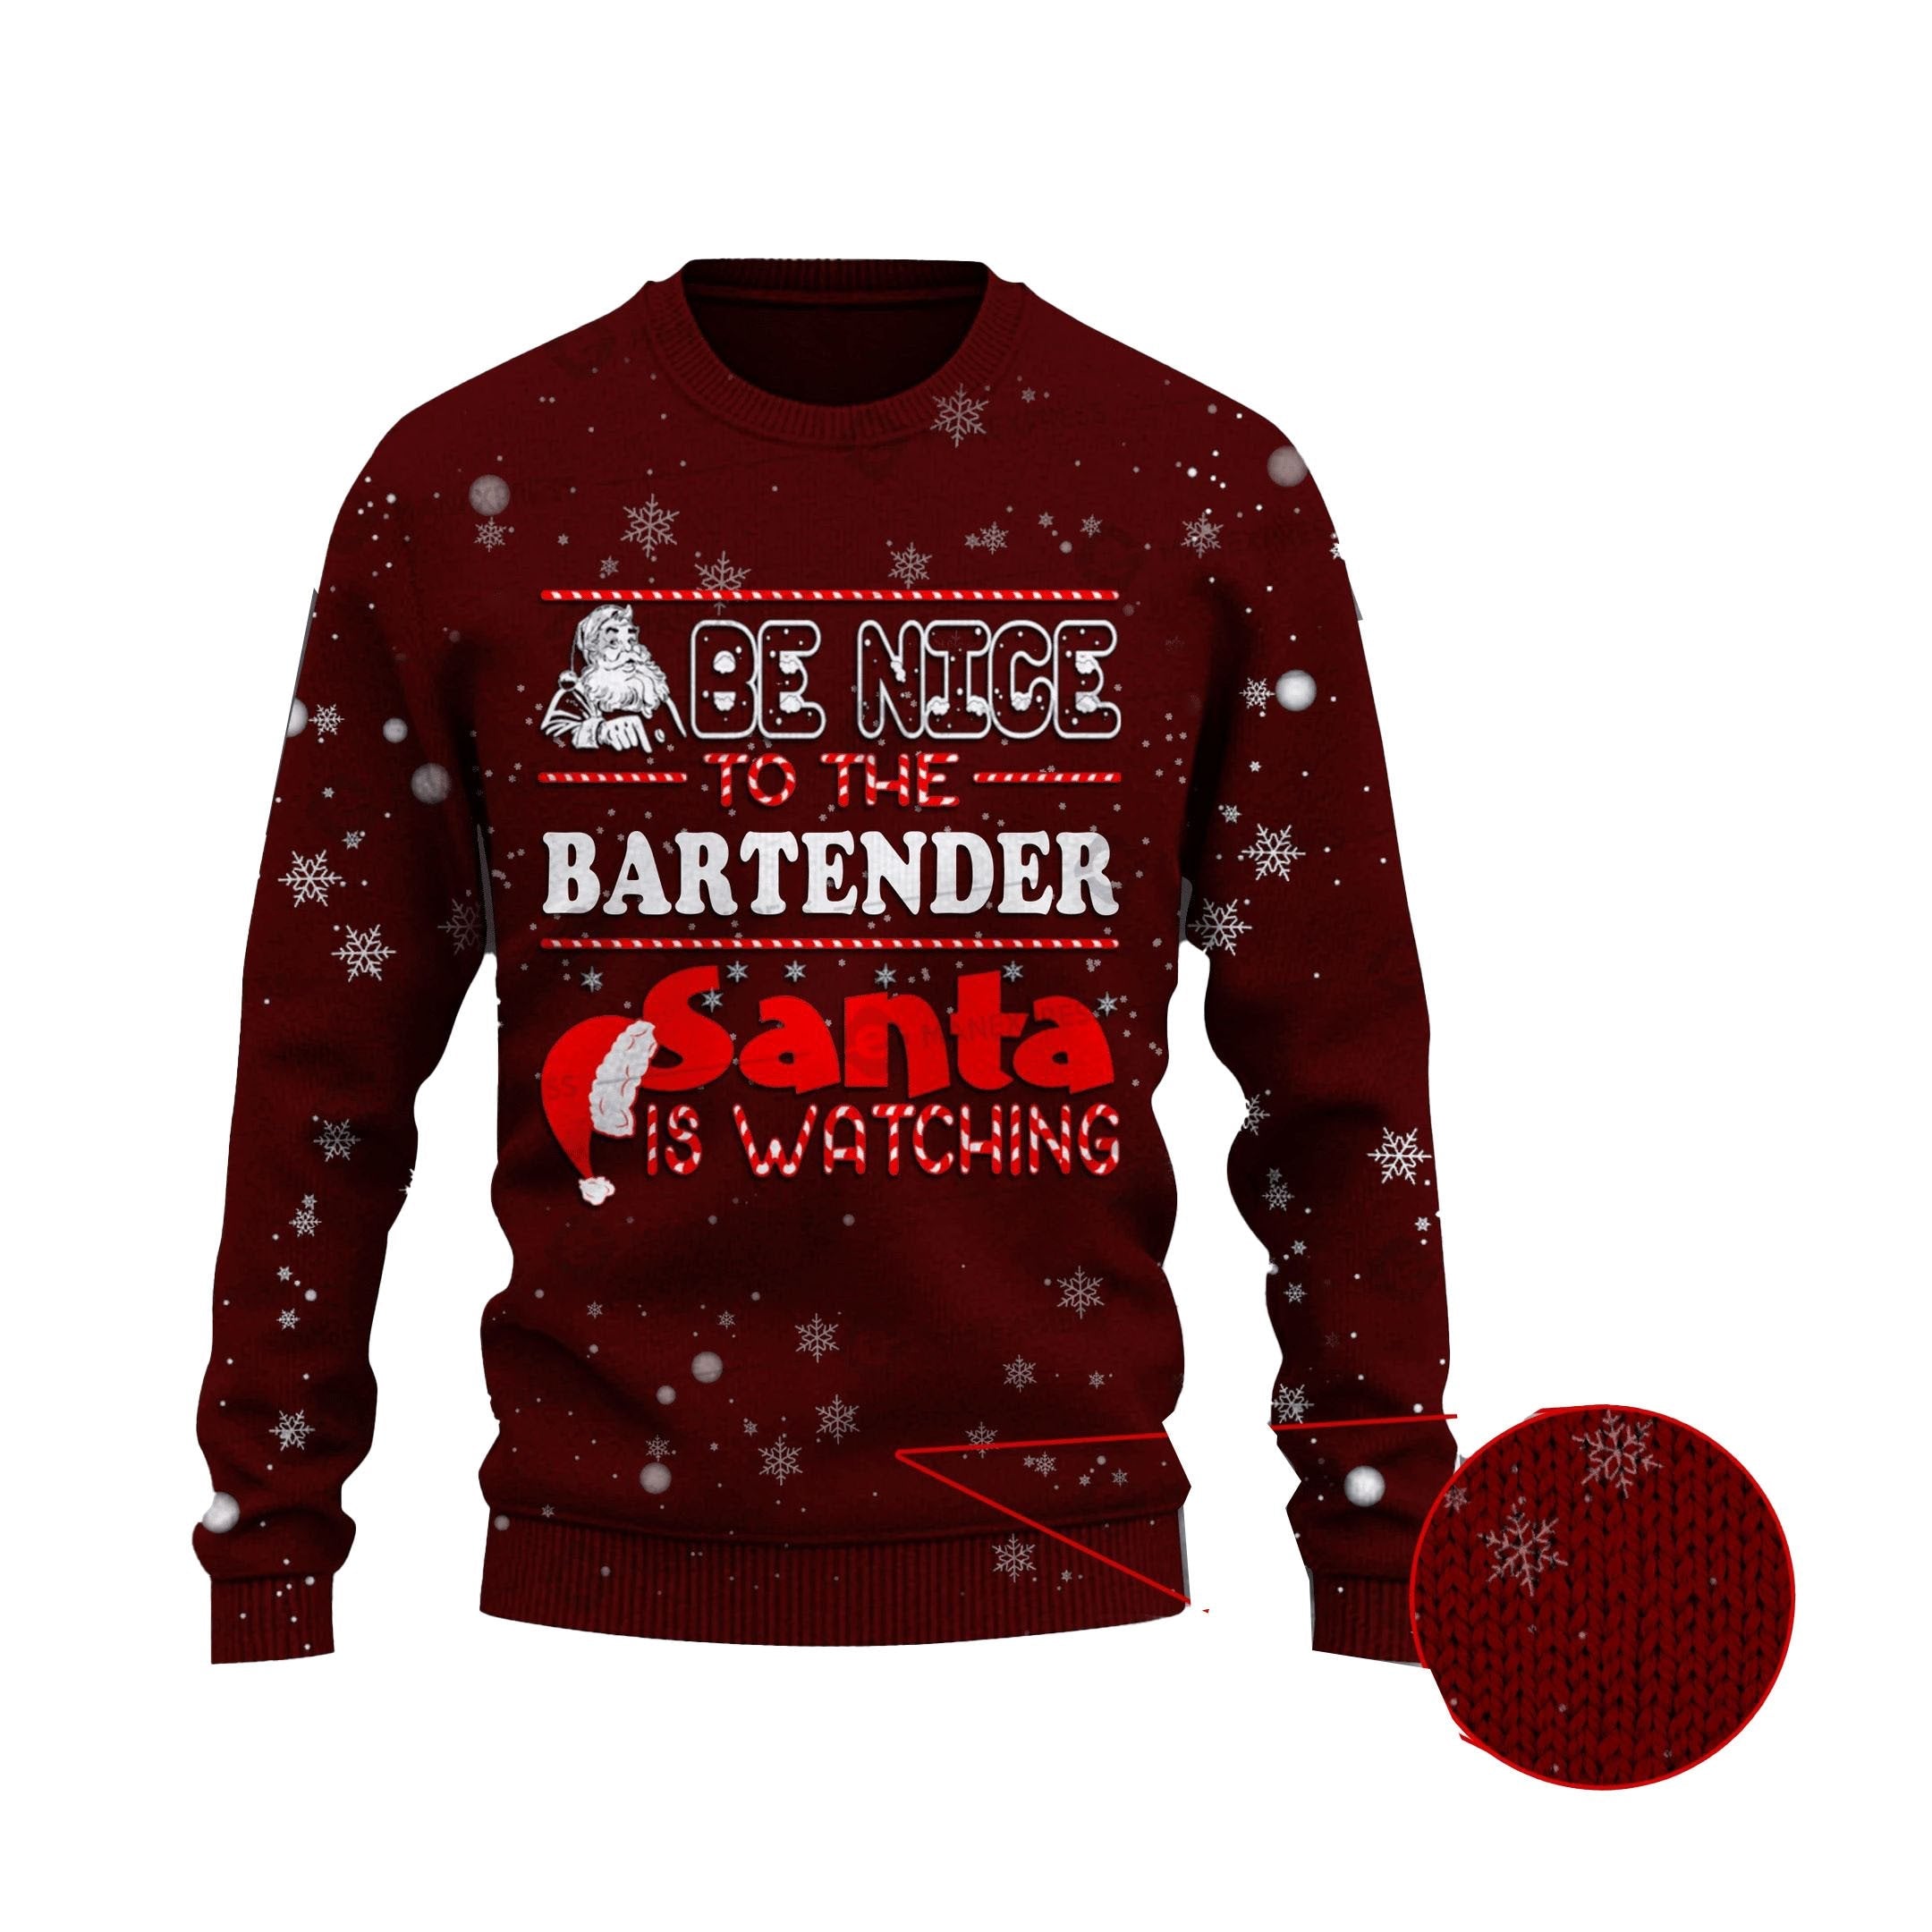 Bartender Christmas Ugly Sweater Be Nice To The Bartender Santa Is Watching Red Sweater 4028